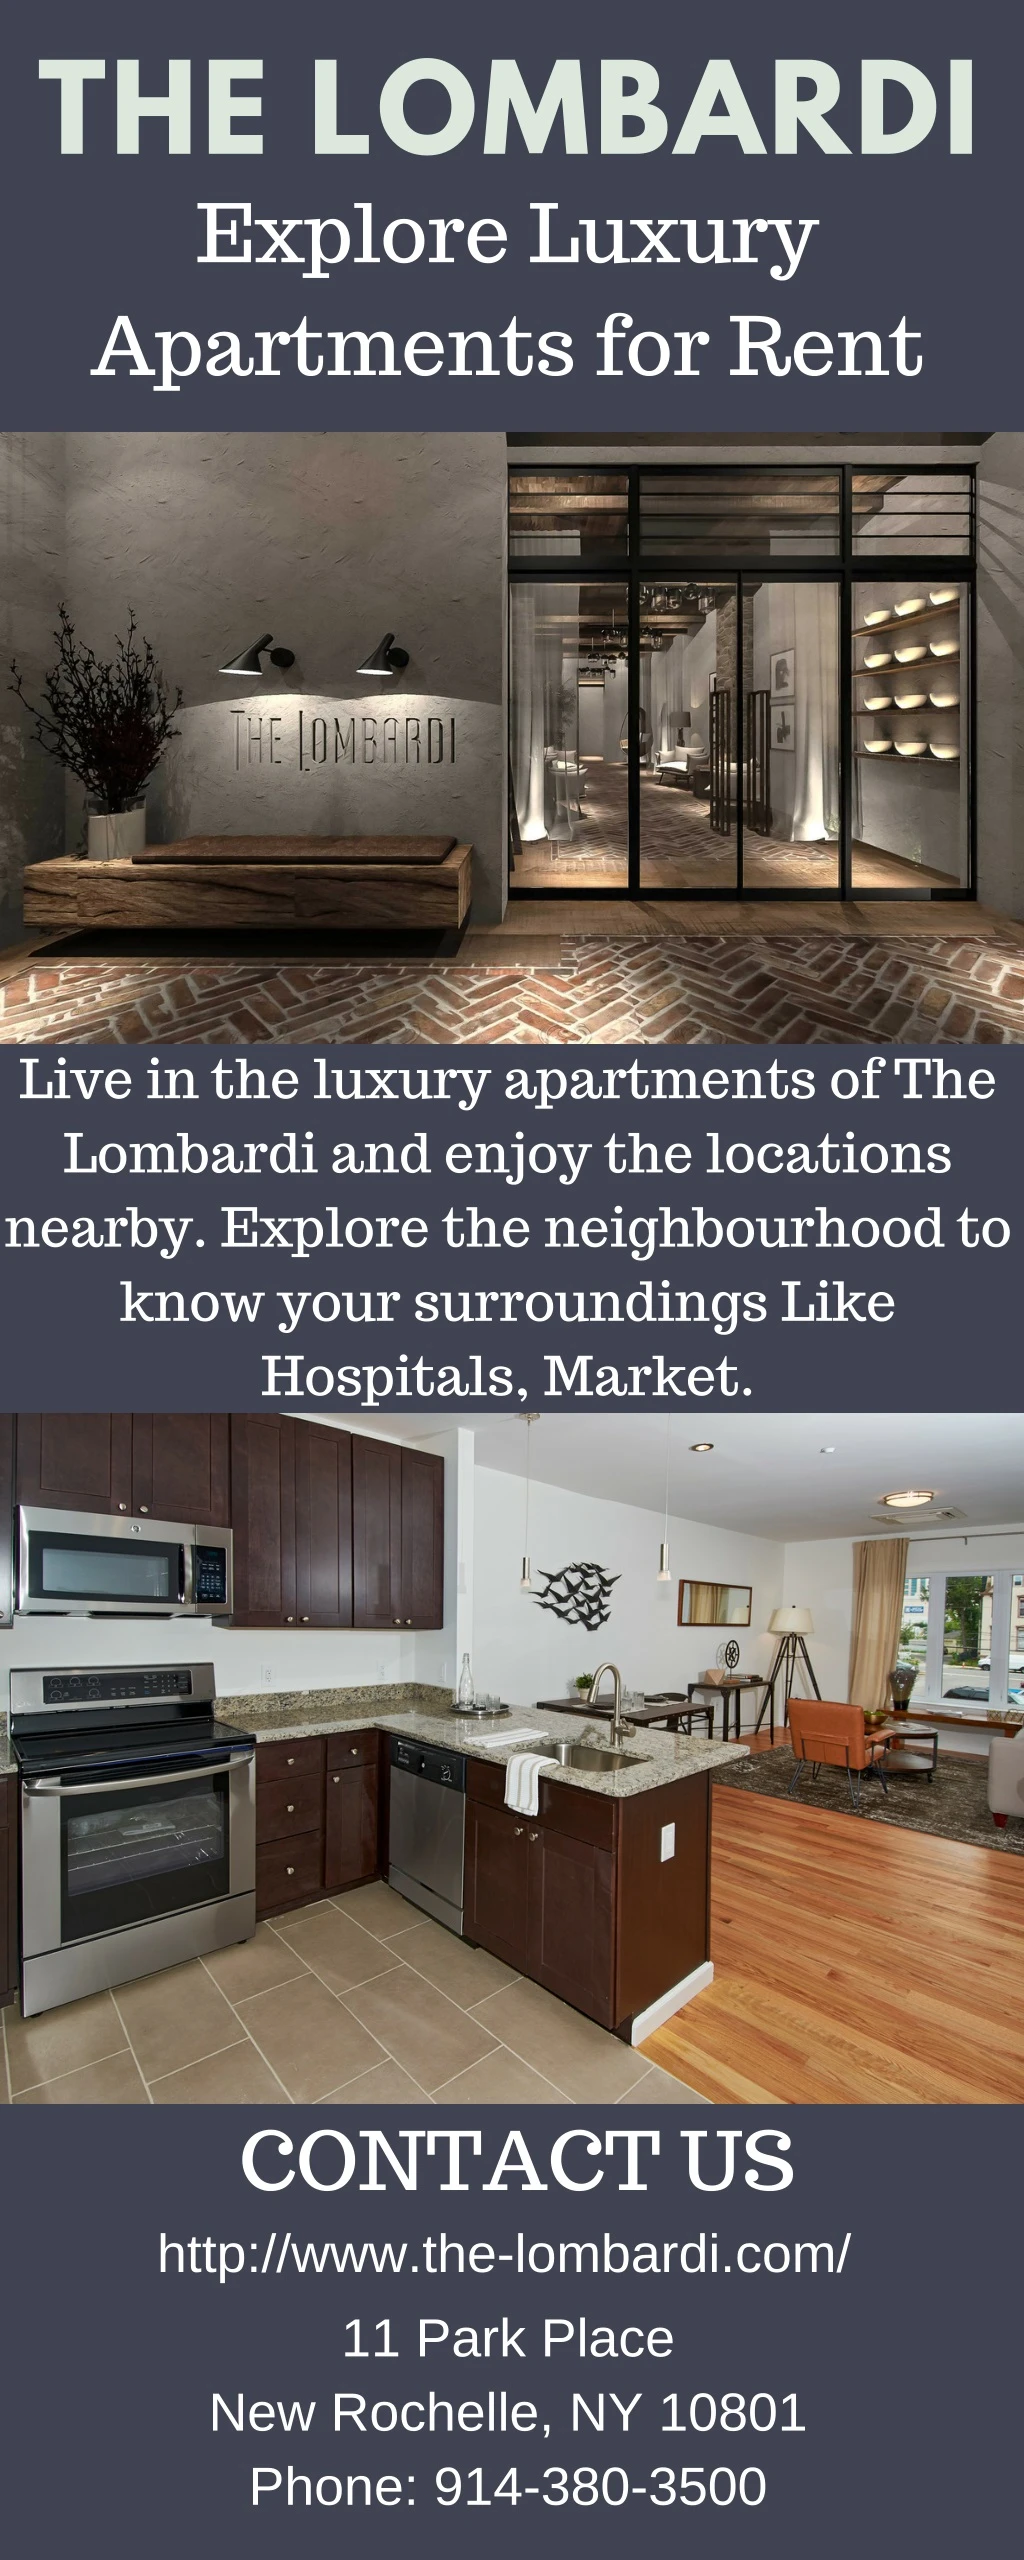 the lombardi explore luxury apartments for rent